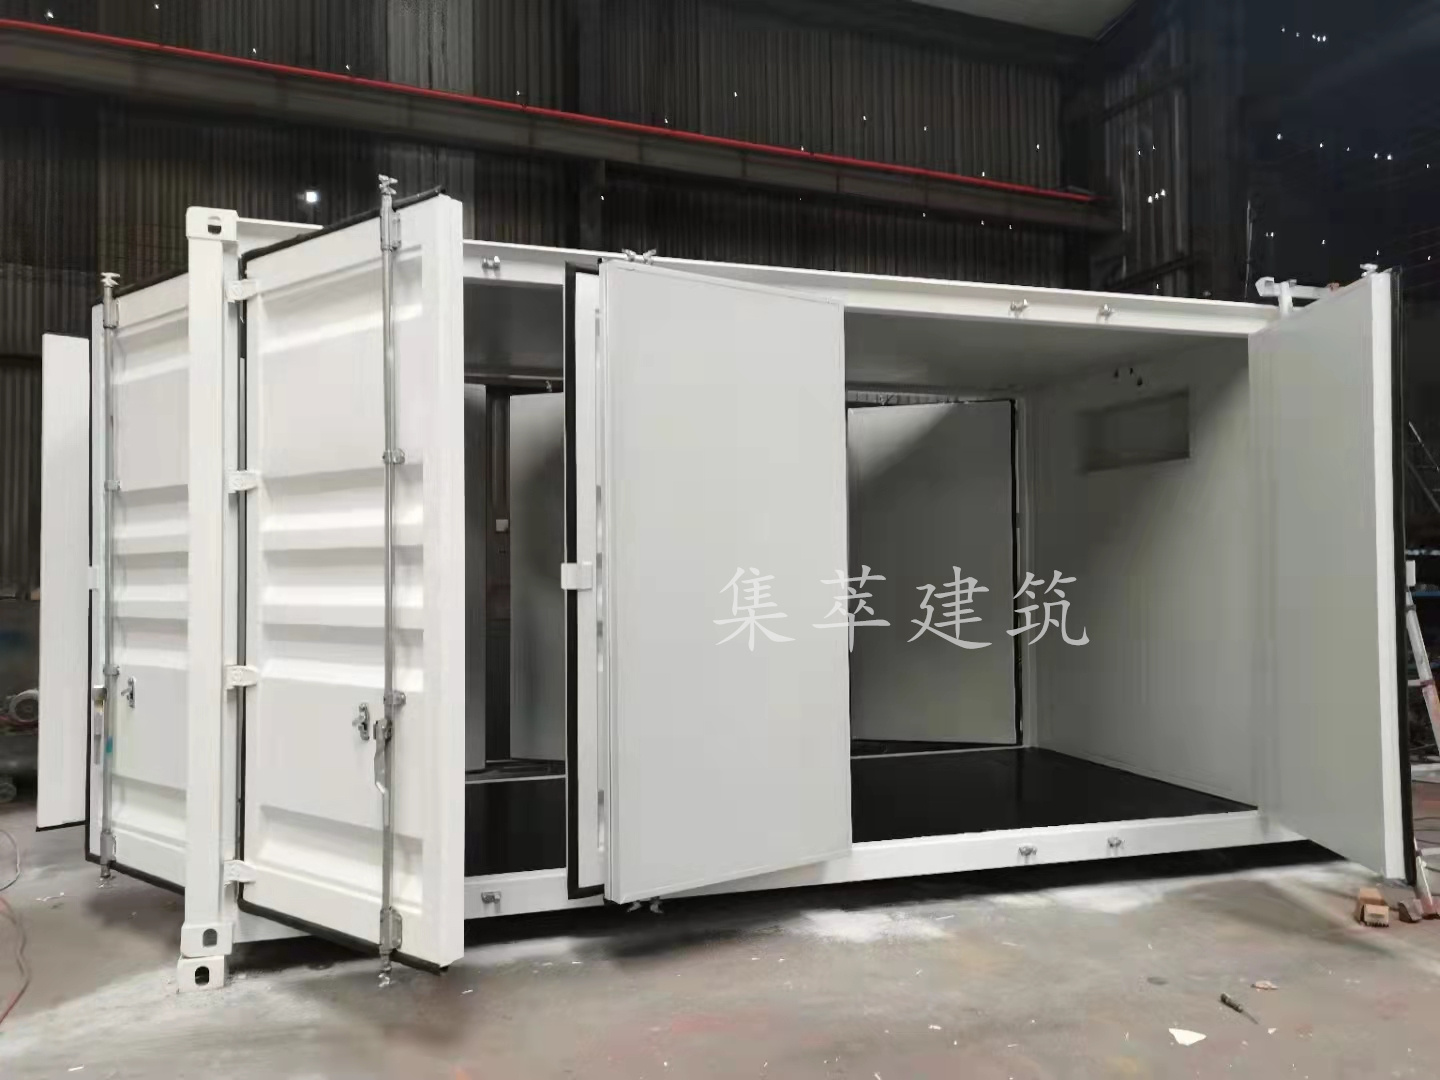 Waterproof and insulation rock wool sandwich panel container equipment box special box renovation ro